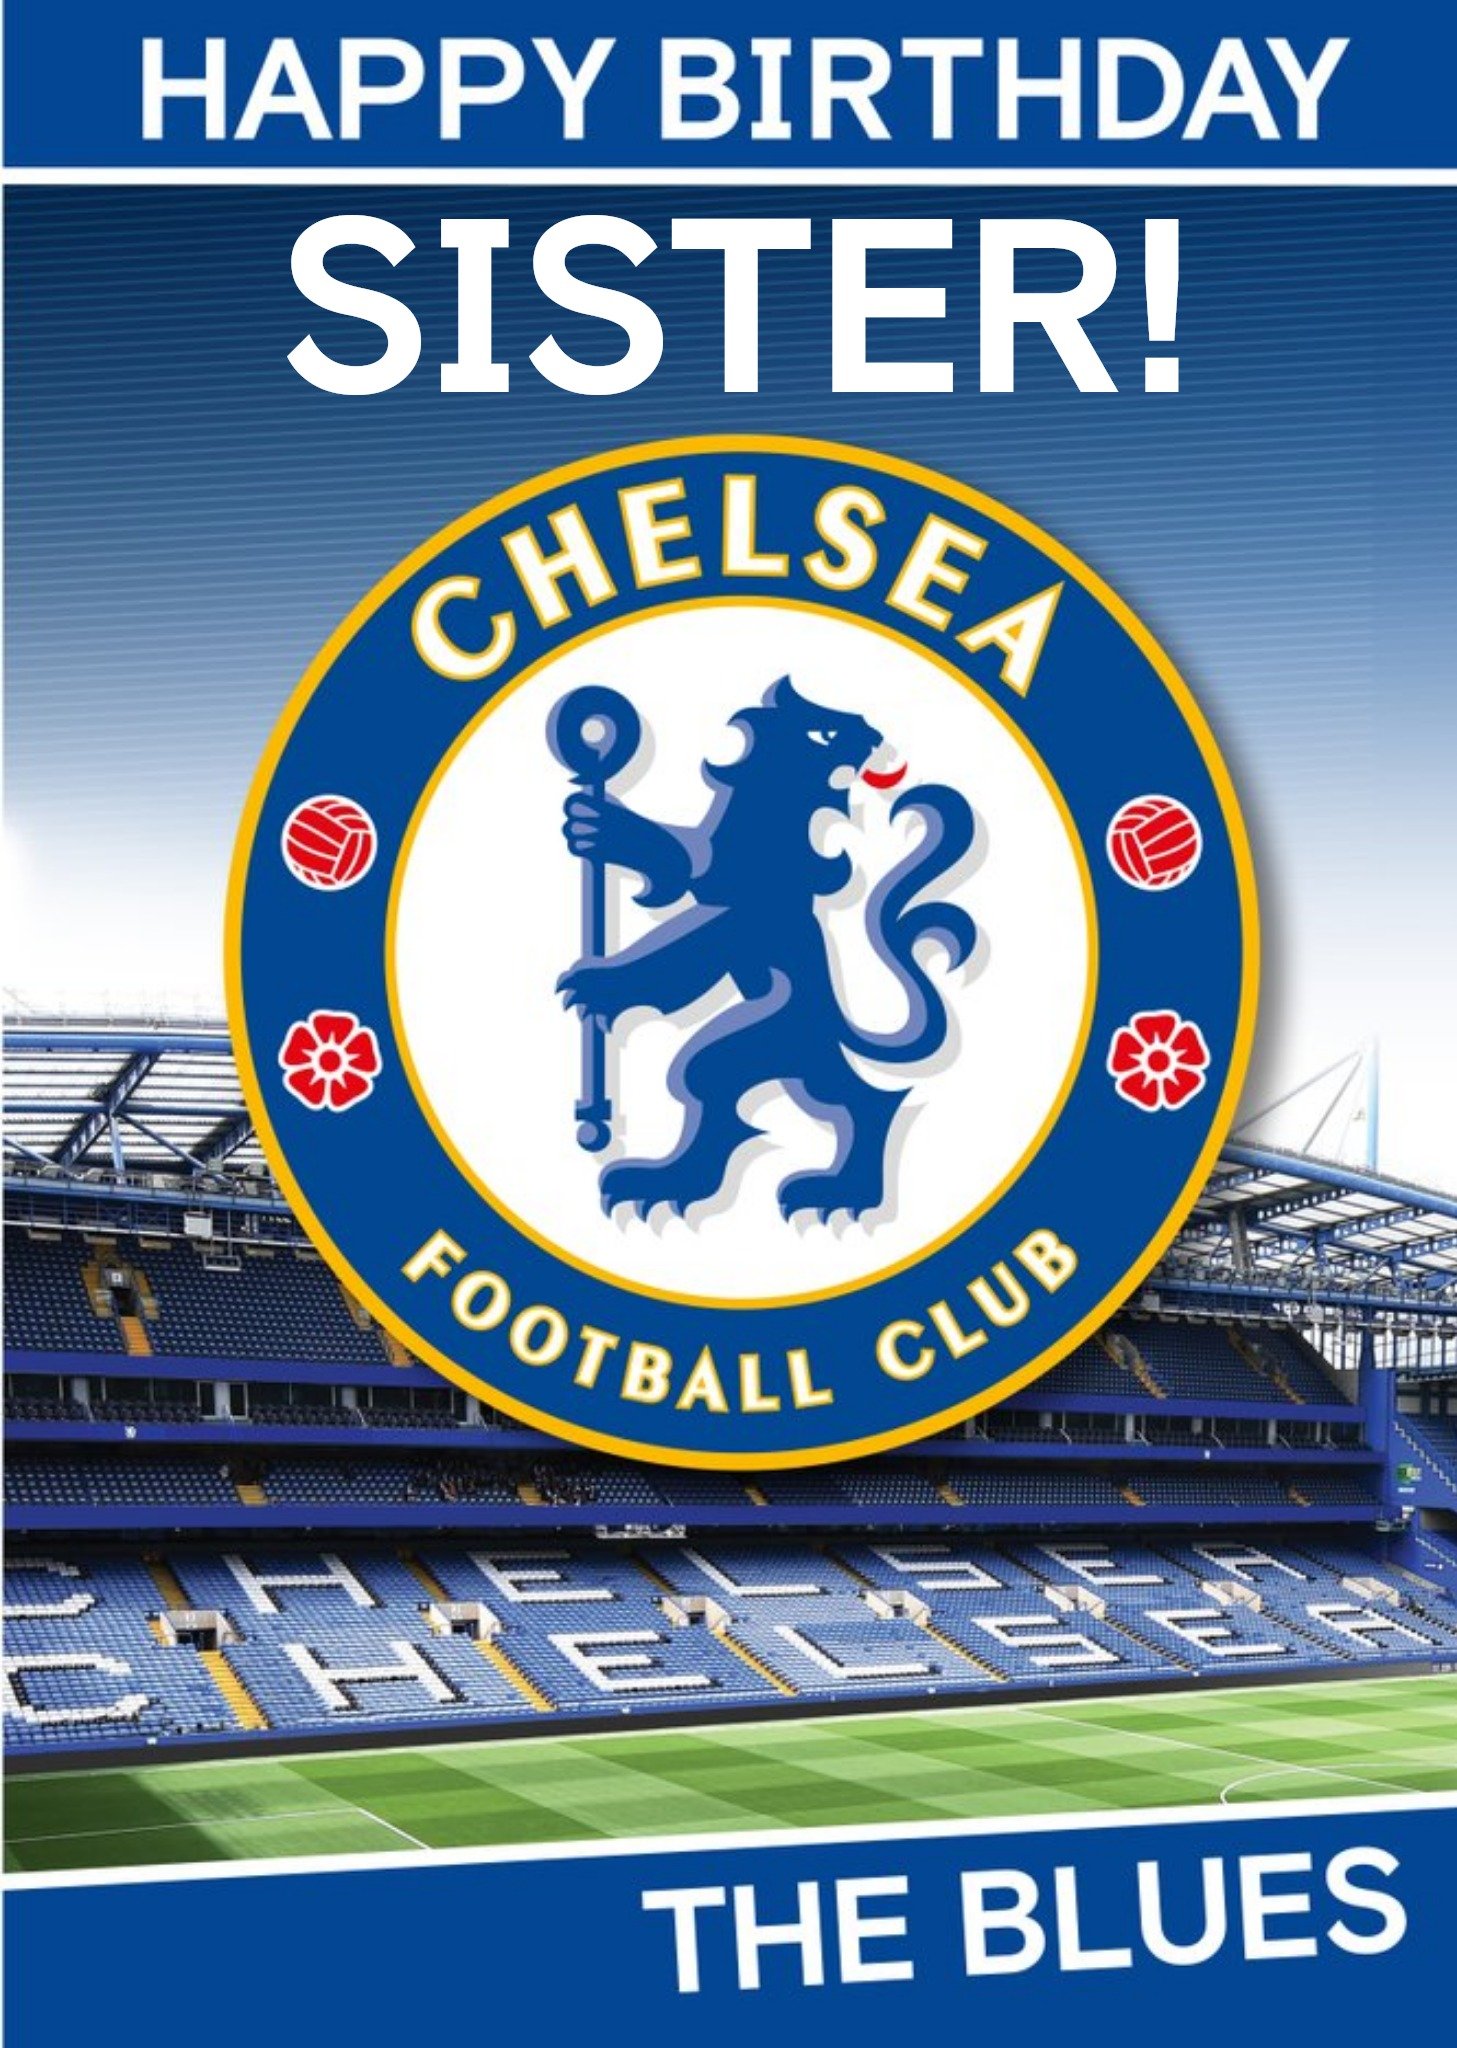 Chelsea Fc You Blues Brother Birthday Sister Card, Large